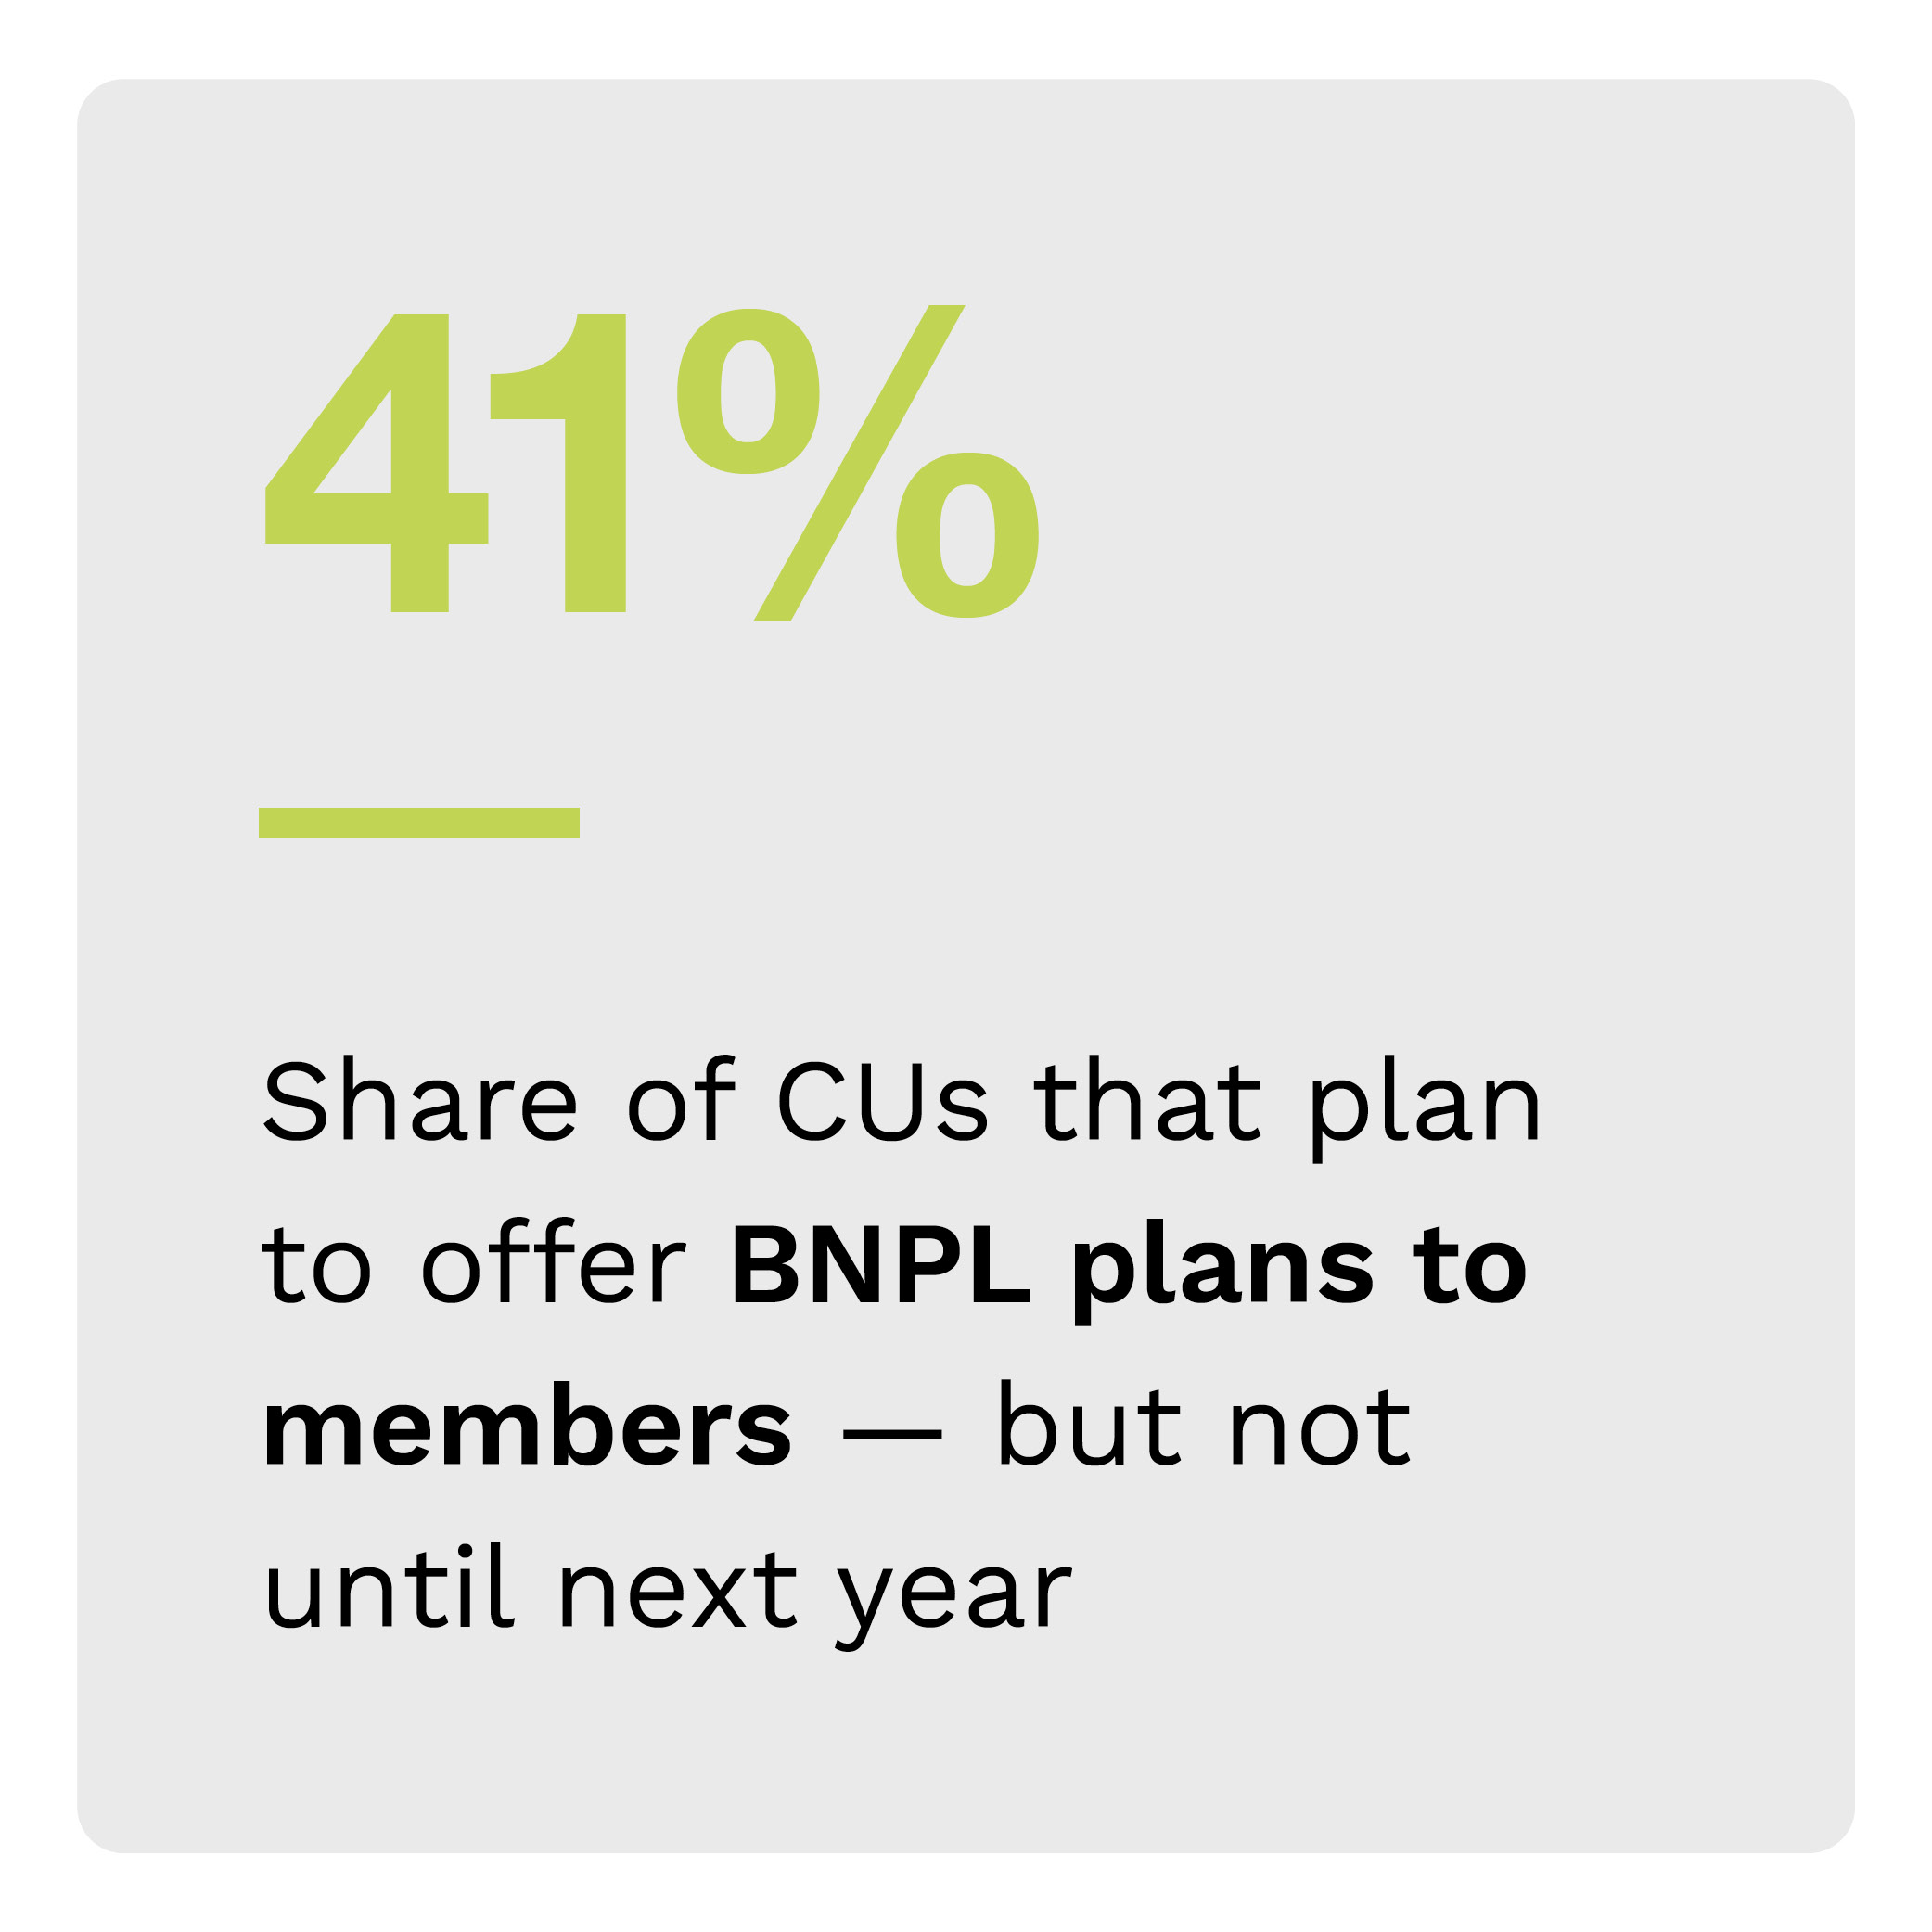 41%: Share of CUs that plan to offer BNPL plans to members - but not until next year